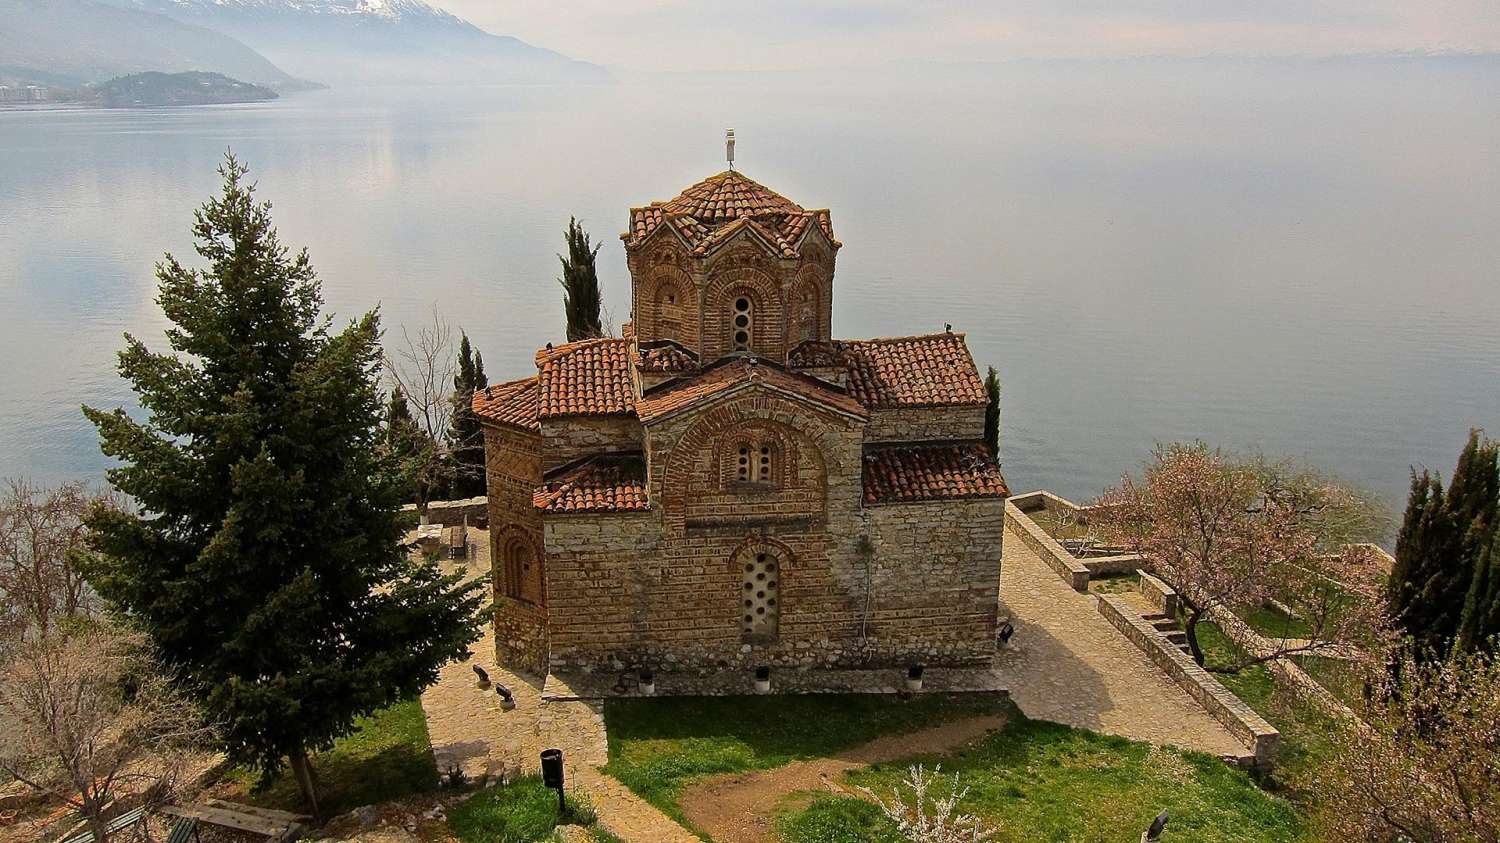 8-Day Private Tour From Albania To Macedonia | experitour.com